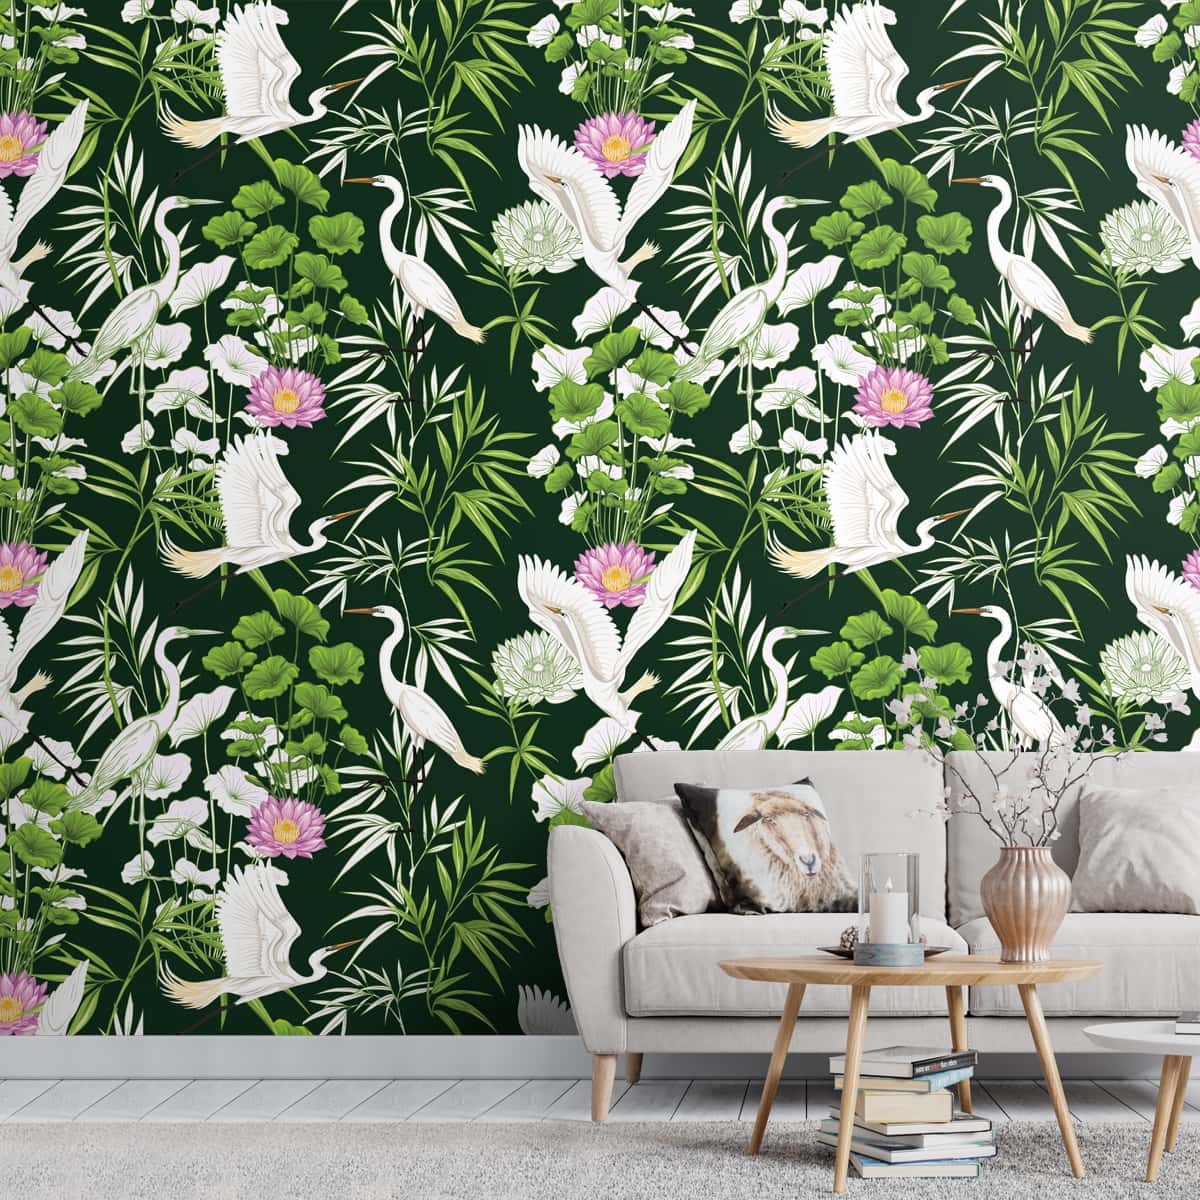 Tropical Seamless Pattern with Flamingo Birds and Flowers.